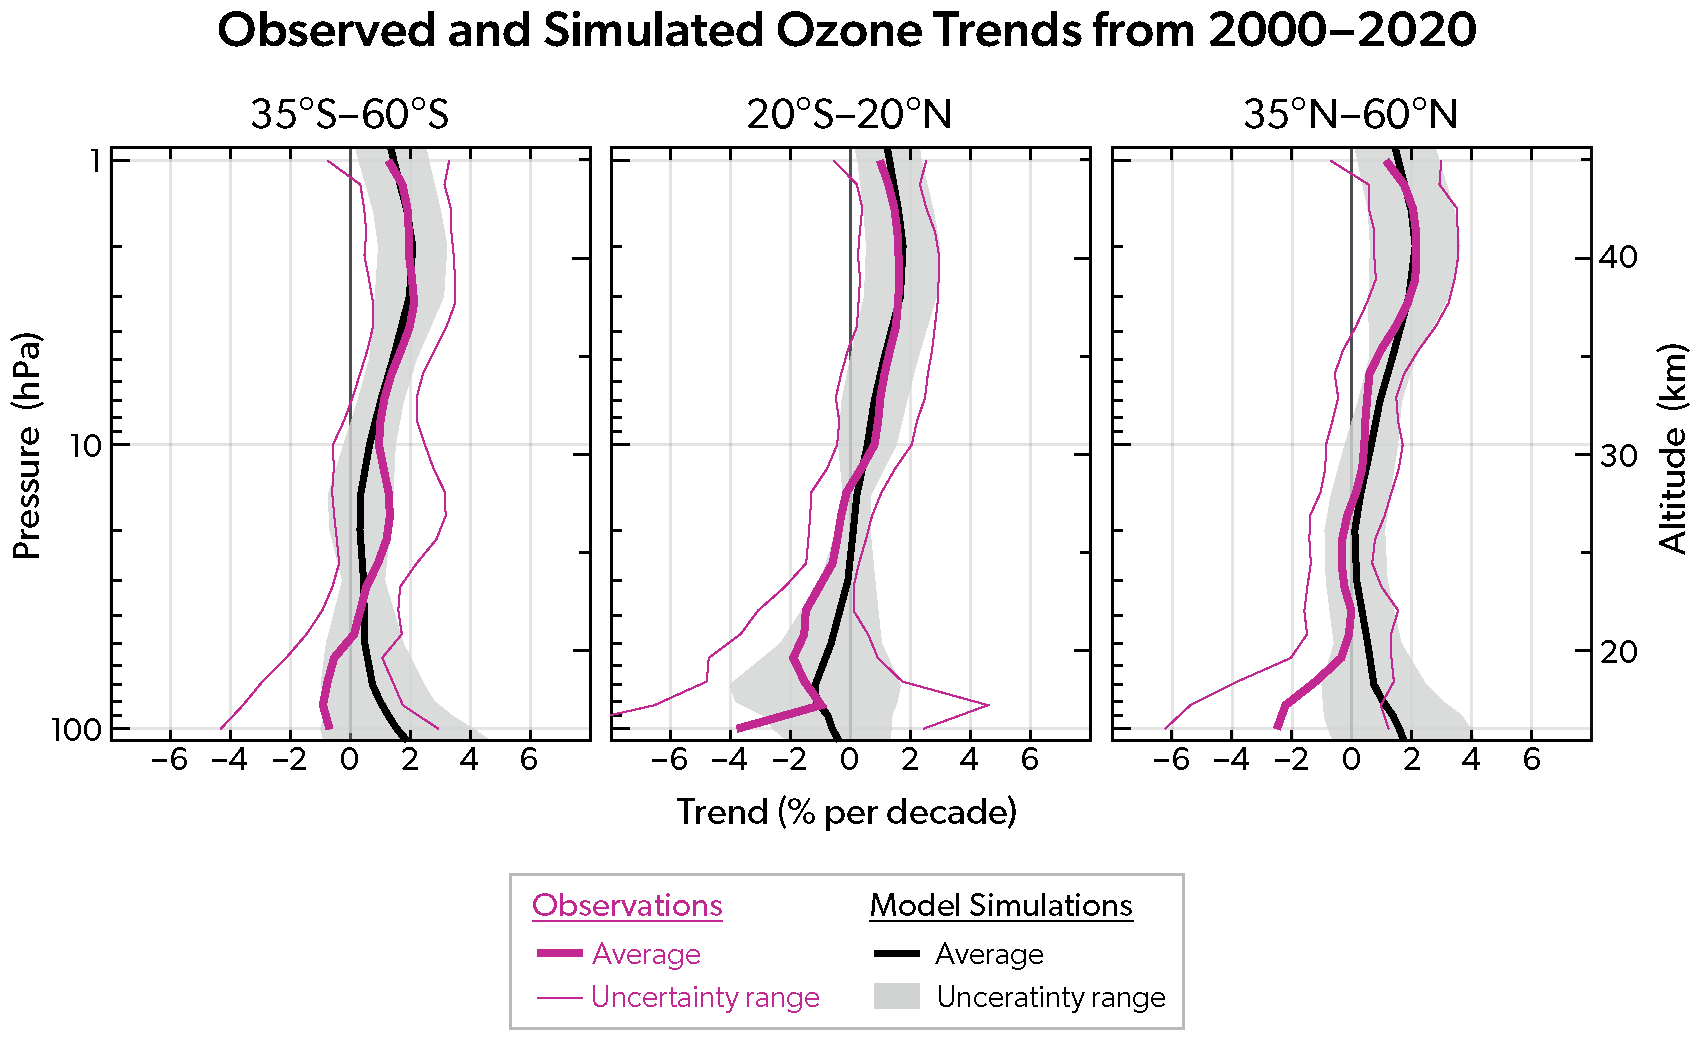 Observed and Simulated Ozone Trends from 2000-2020